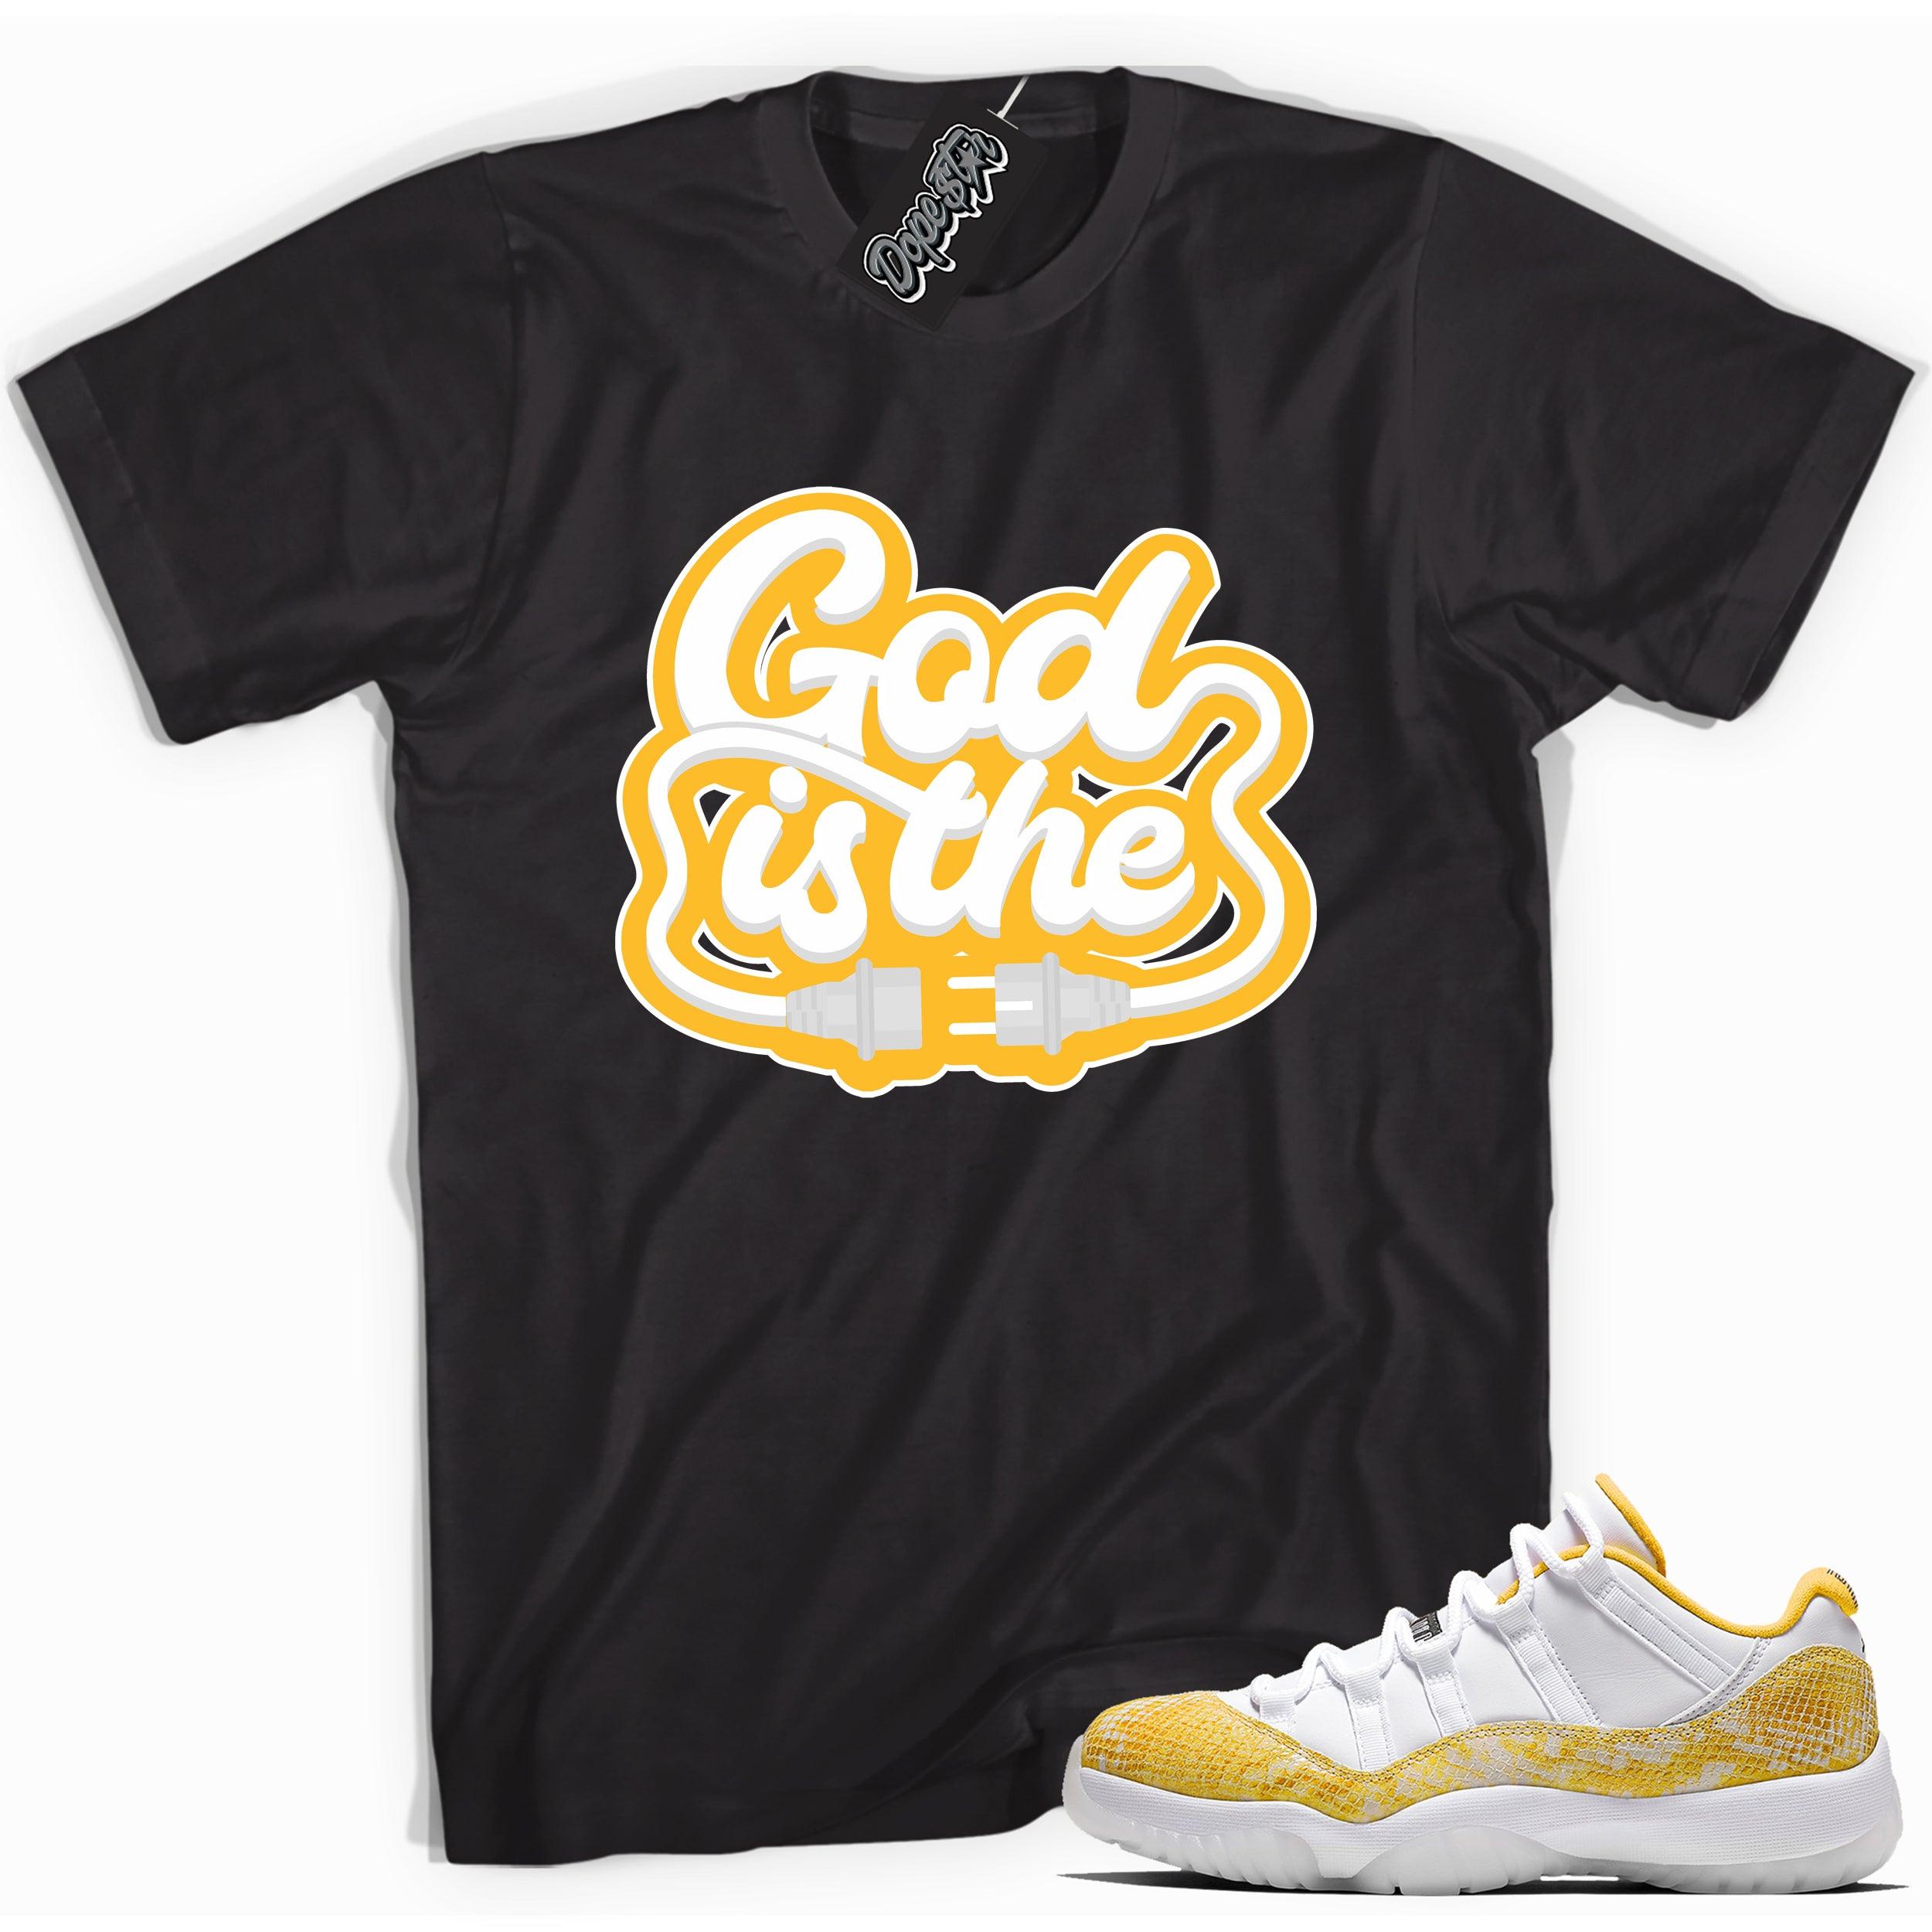 Cool black graphic tee with 'god is the plug' print, that perfectly matches  Air Jordan 11 Low Yellow Snakeskin sneakers